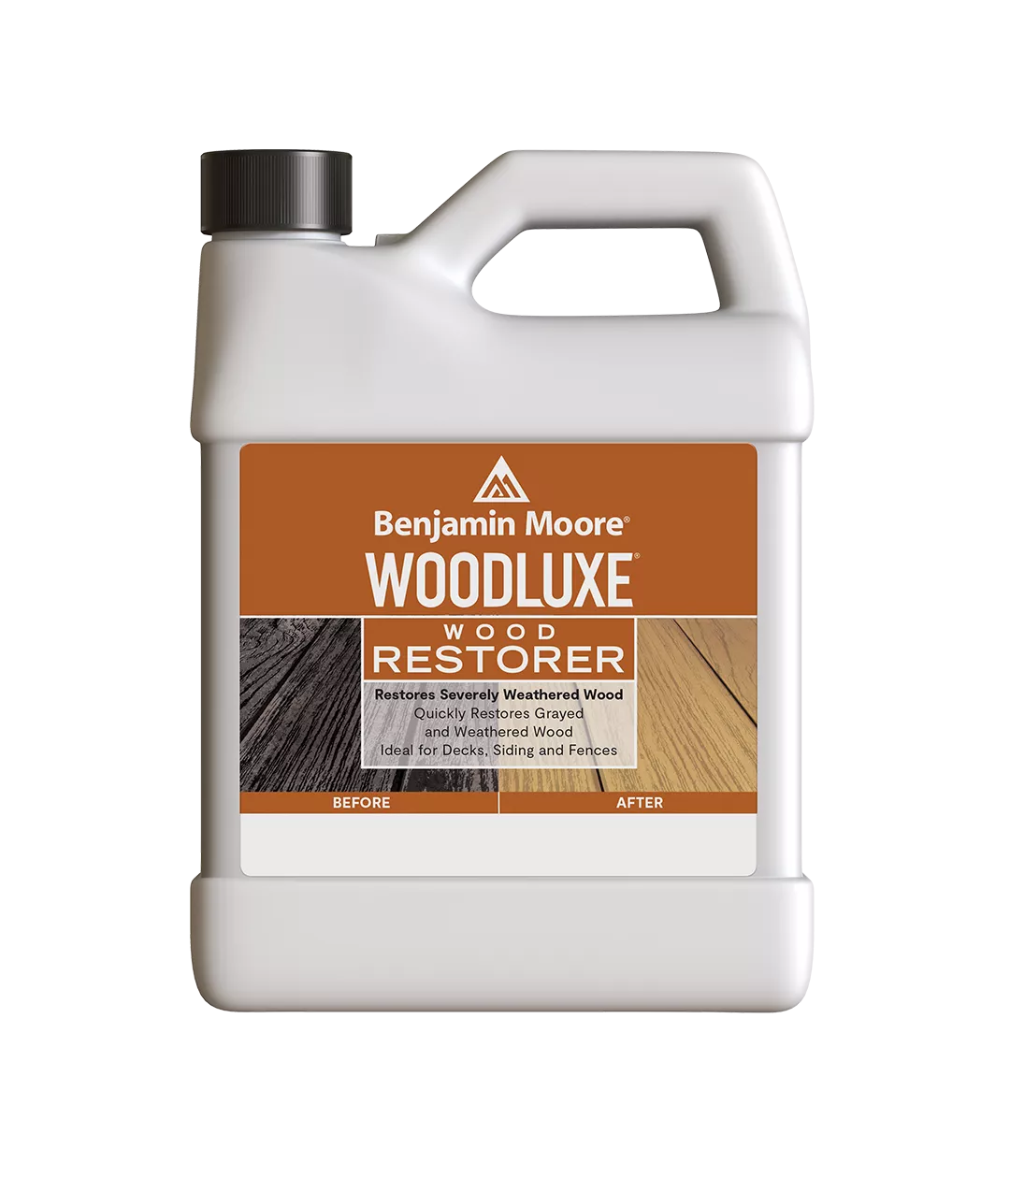 Benjamin Moore Woodluxe Wood Restorer Gallon available to shop at Regal Paint Centers in Maryland, Virginia and DC.